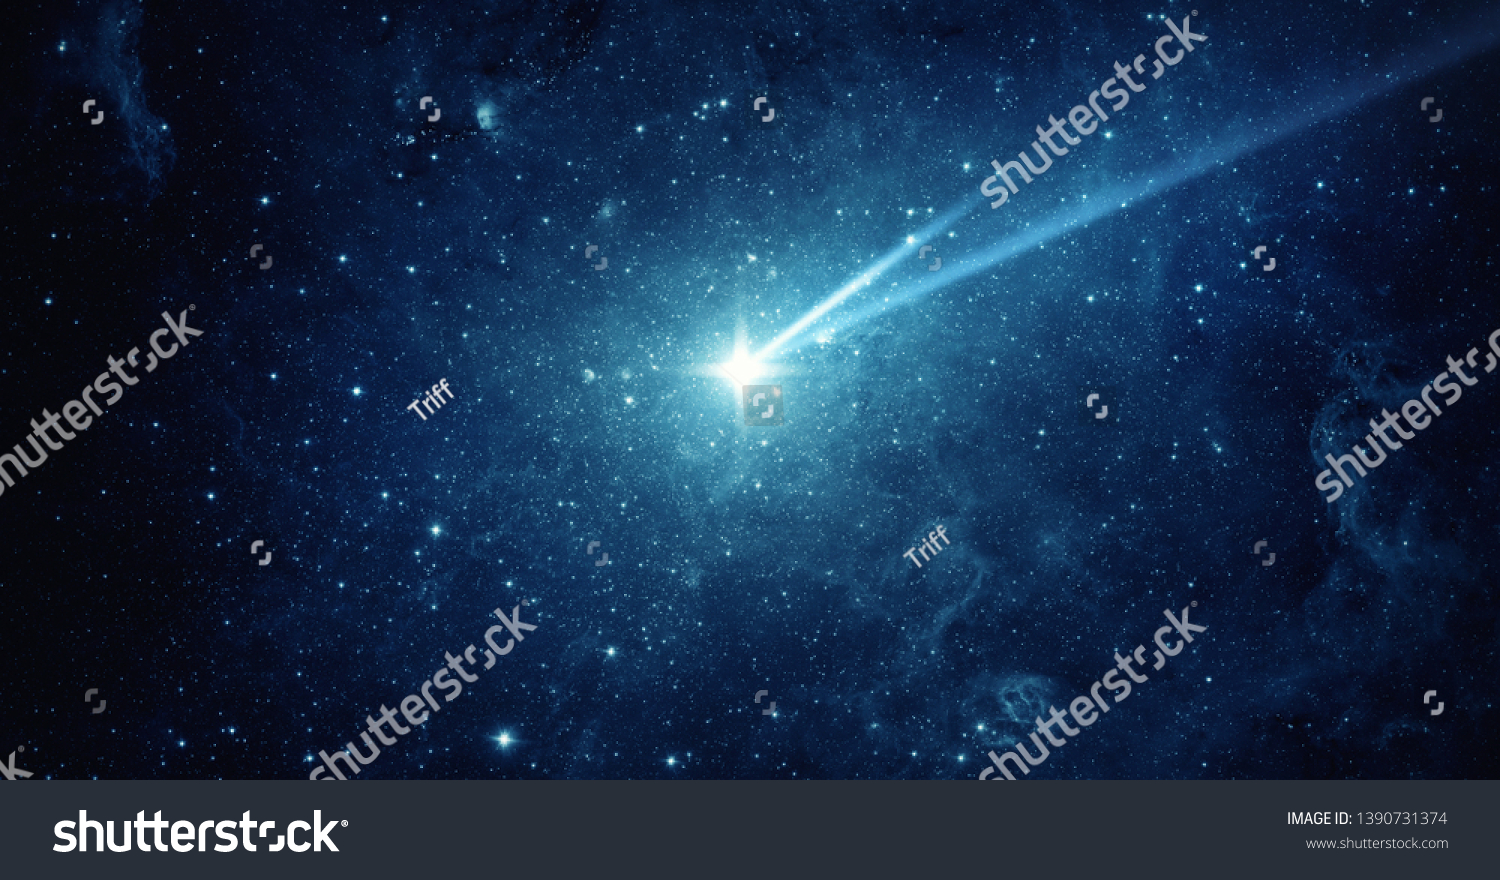 Falling meteorite, asteroid, comet in the starry sky. Elements of this image furnished by NASA.  #1390731374